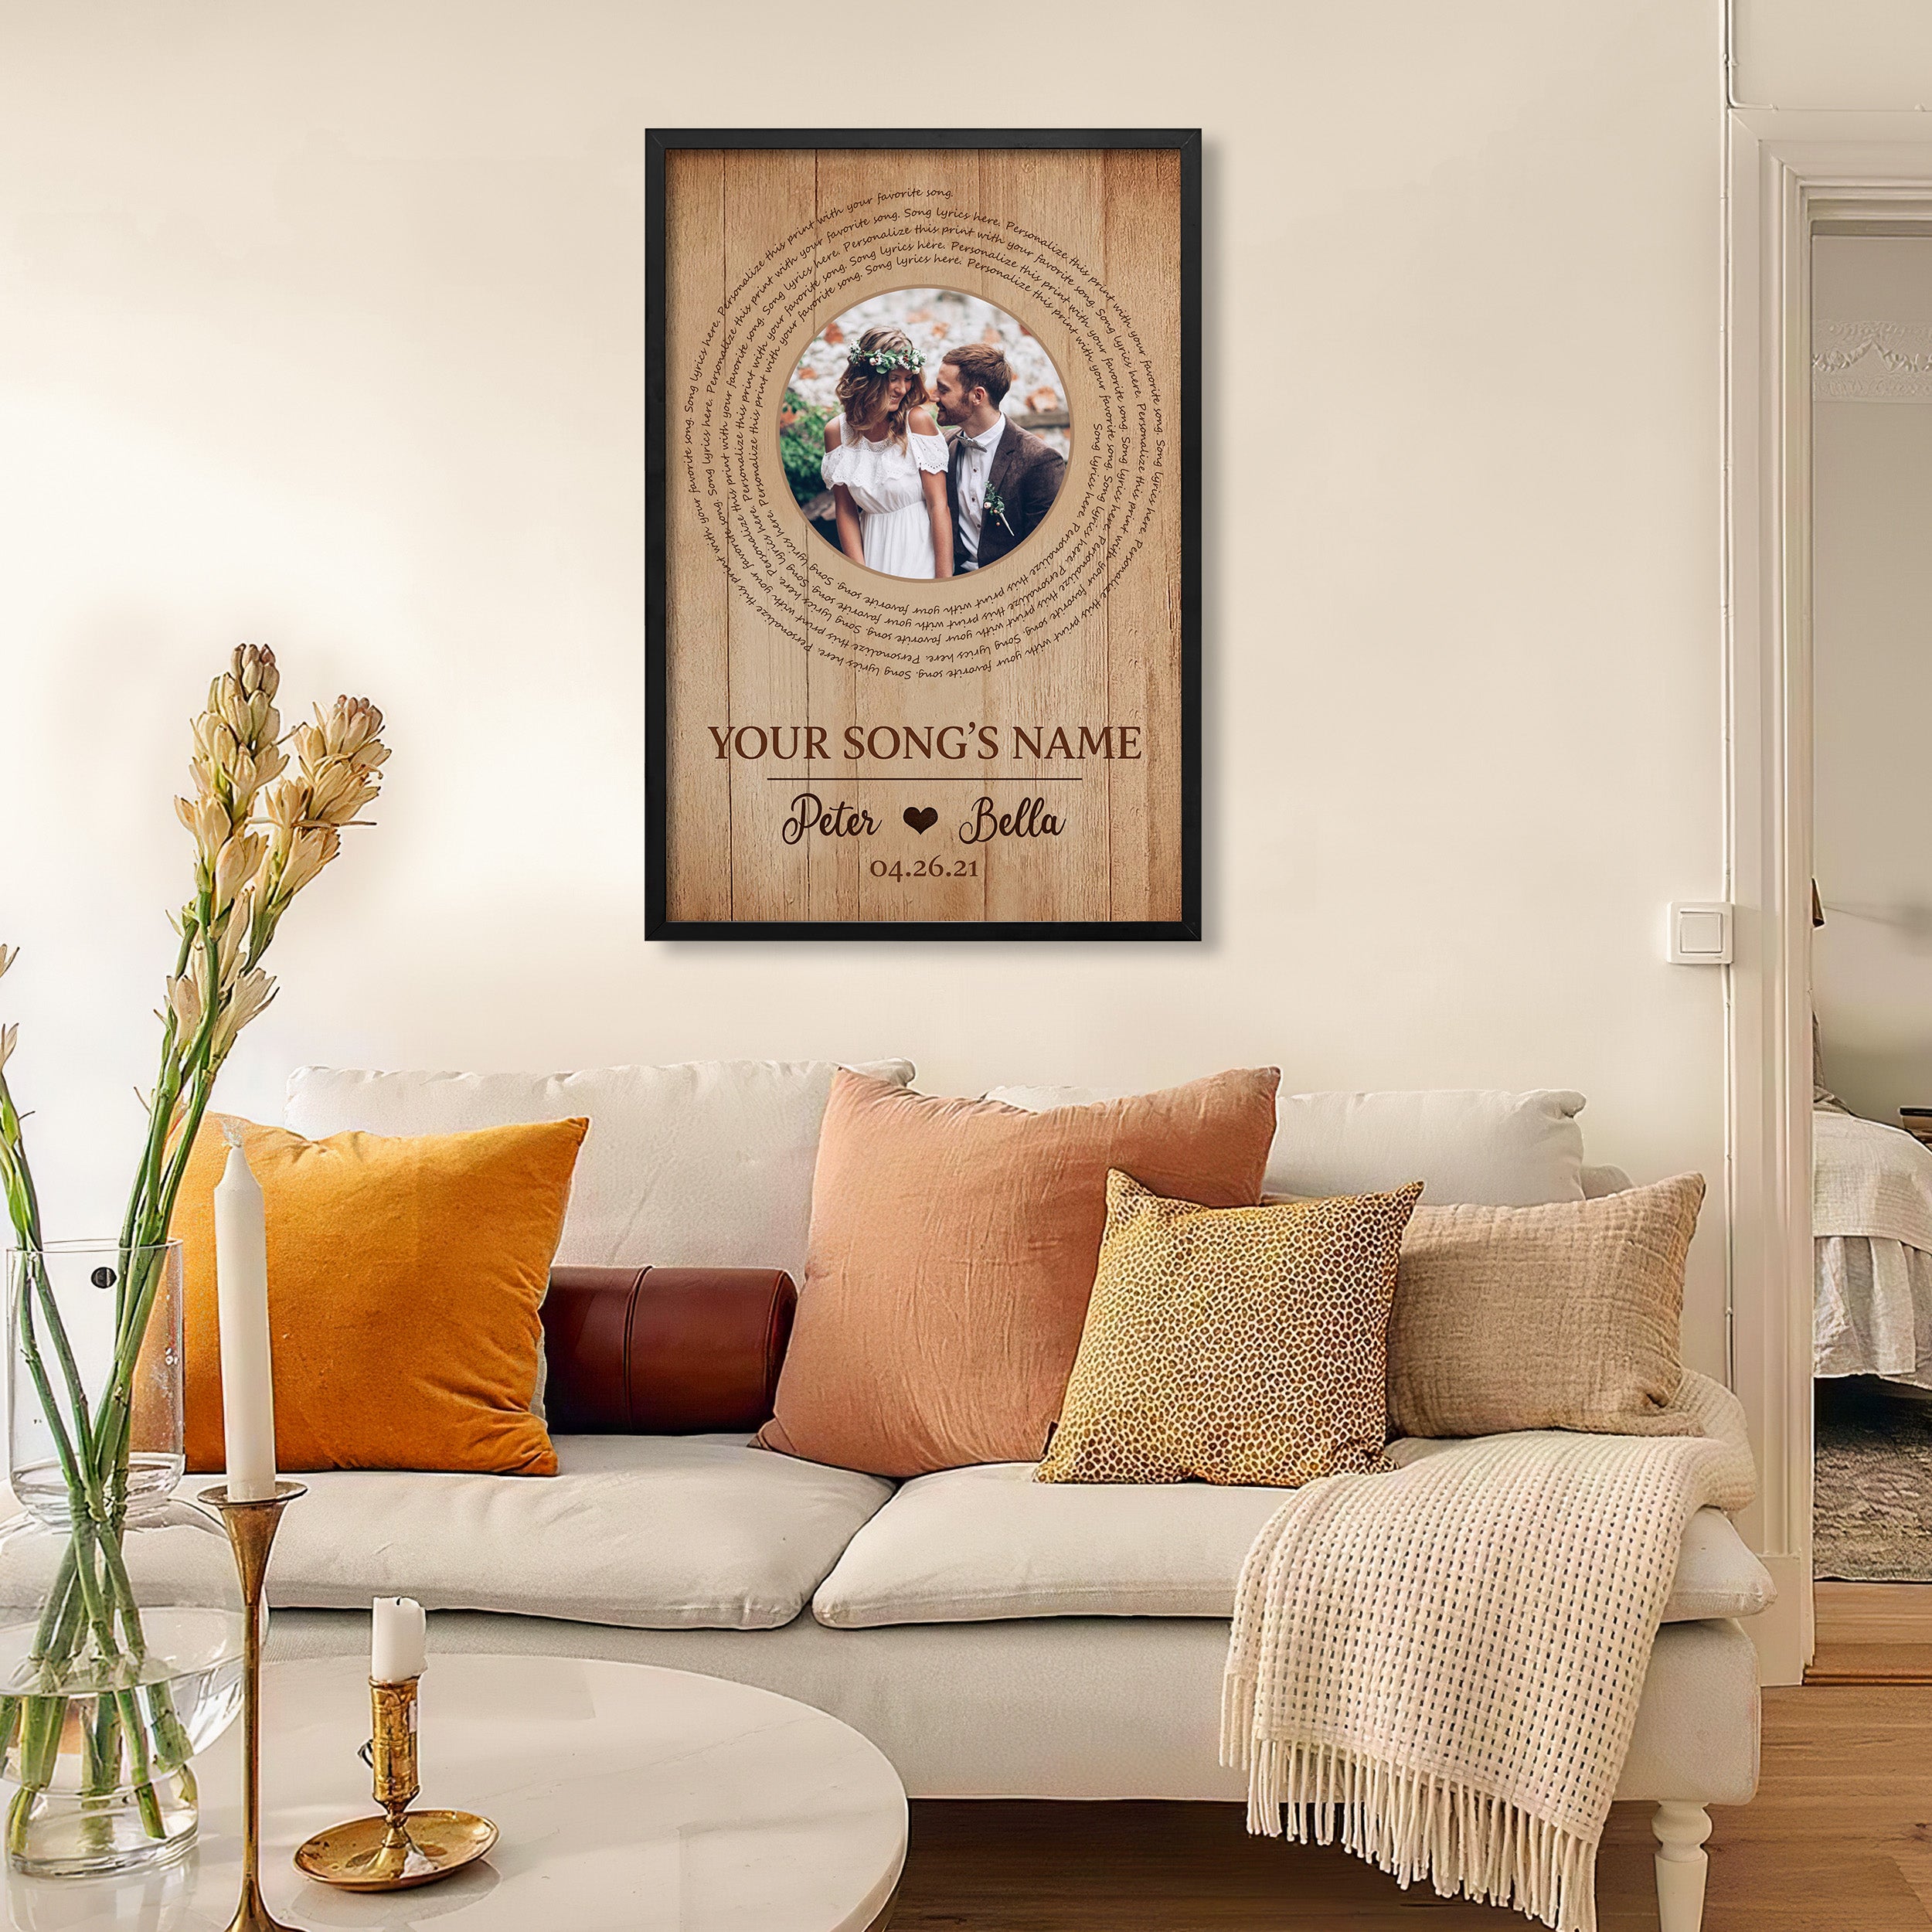 Custom Song Lyrics Wall Art Gifts For Him Personalized Spiral Lyric With Couples Image Decor Portrait Inspirational (Couples Gift For Her)